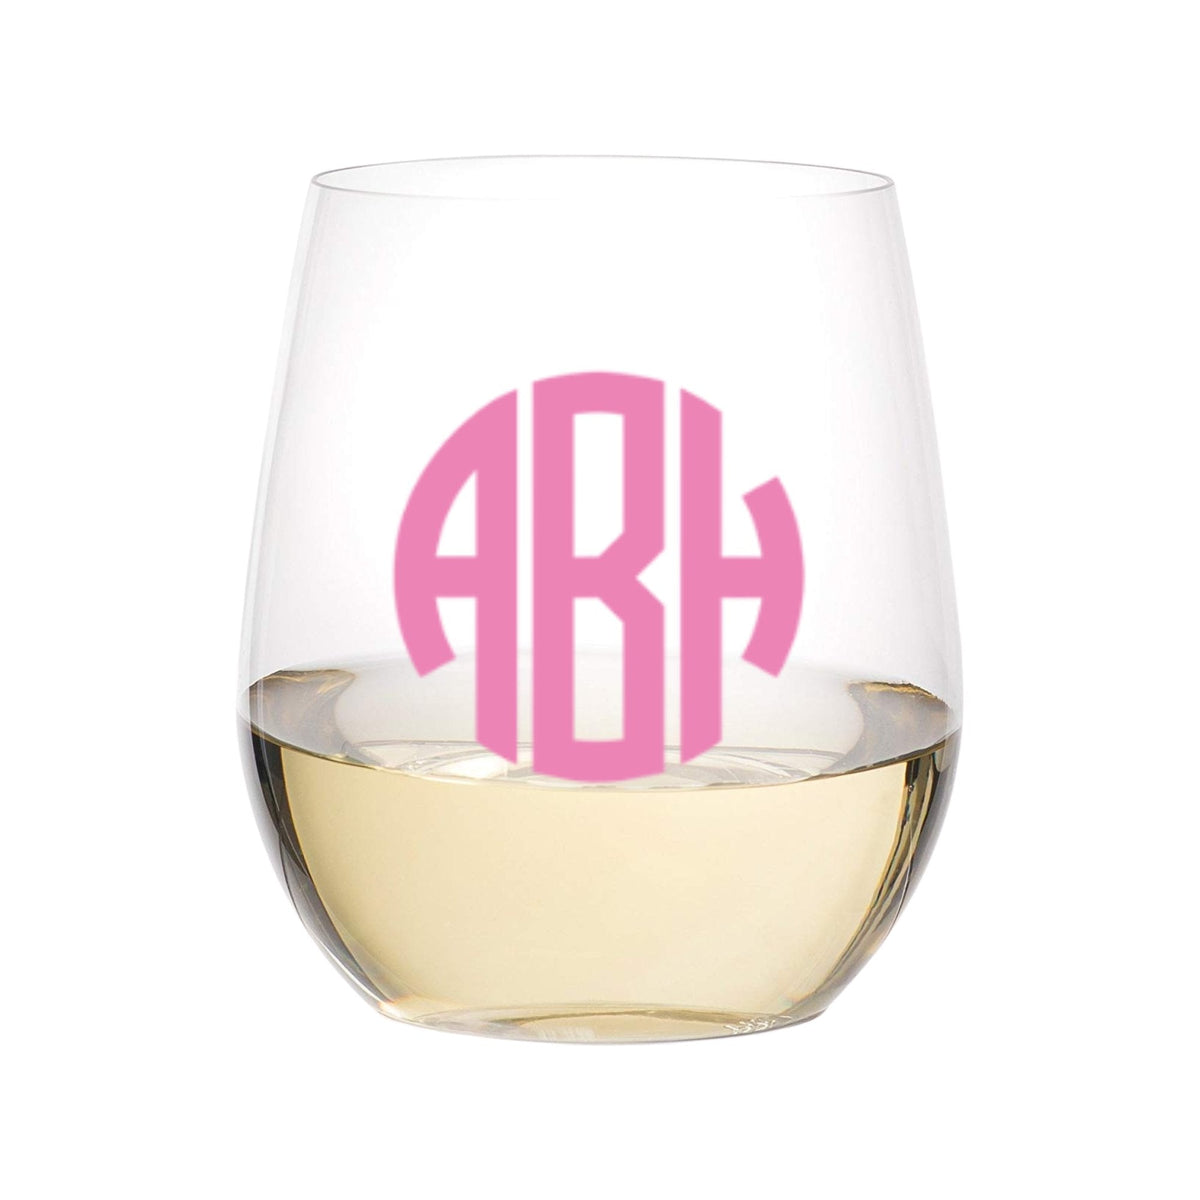 Personalized White Wine Monogrammed Glasses